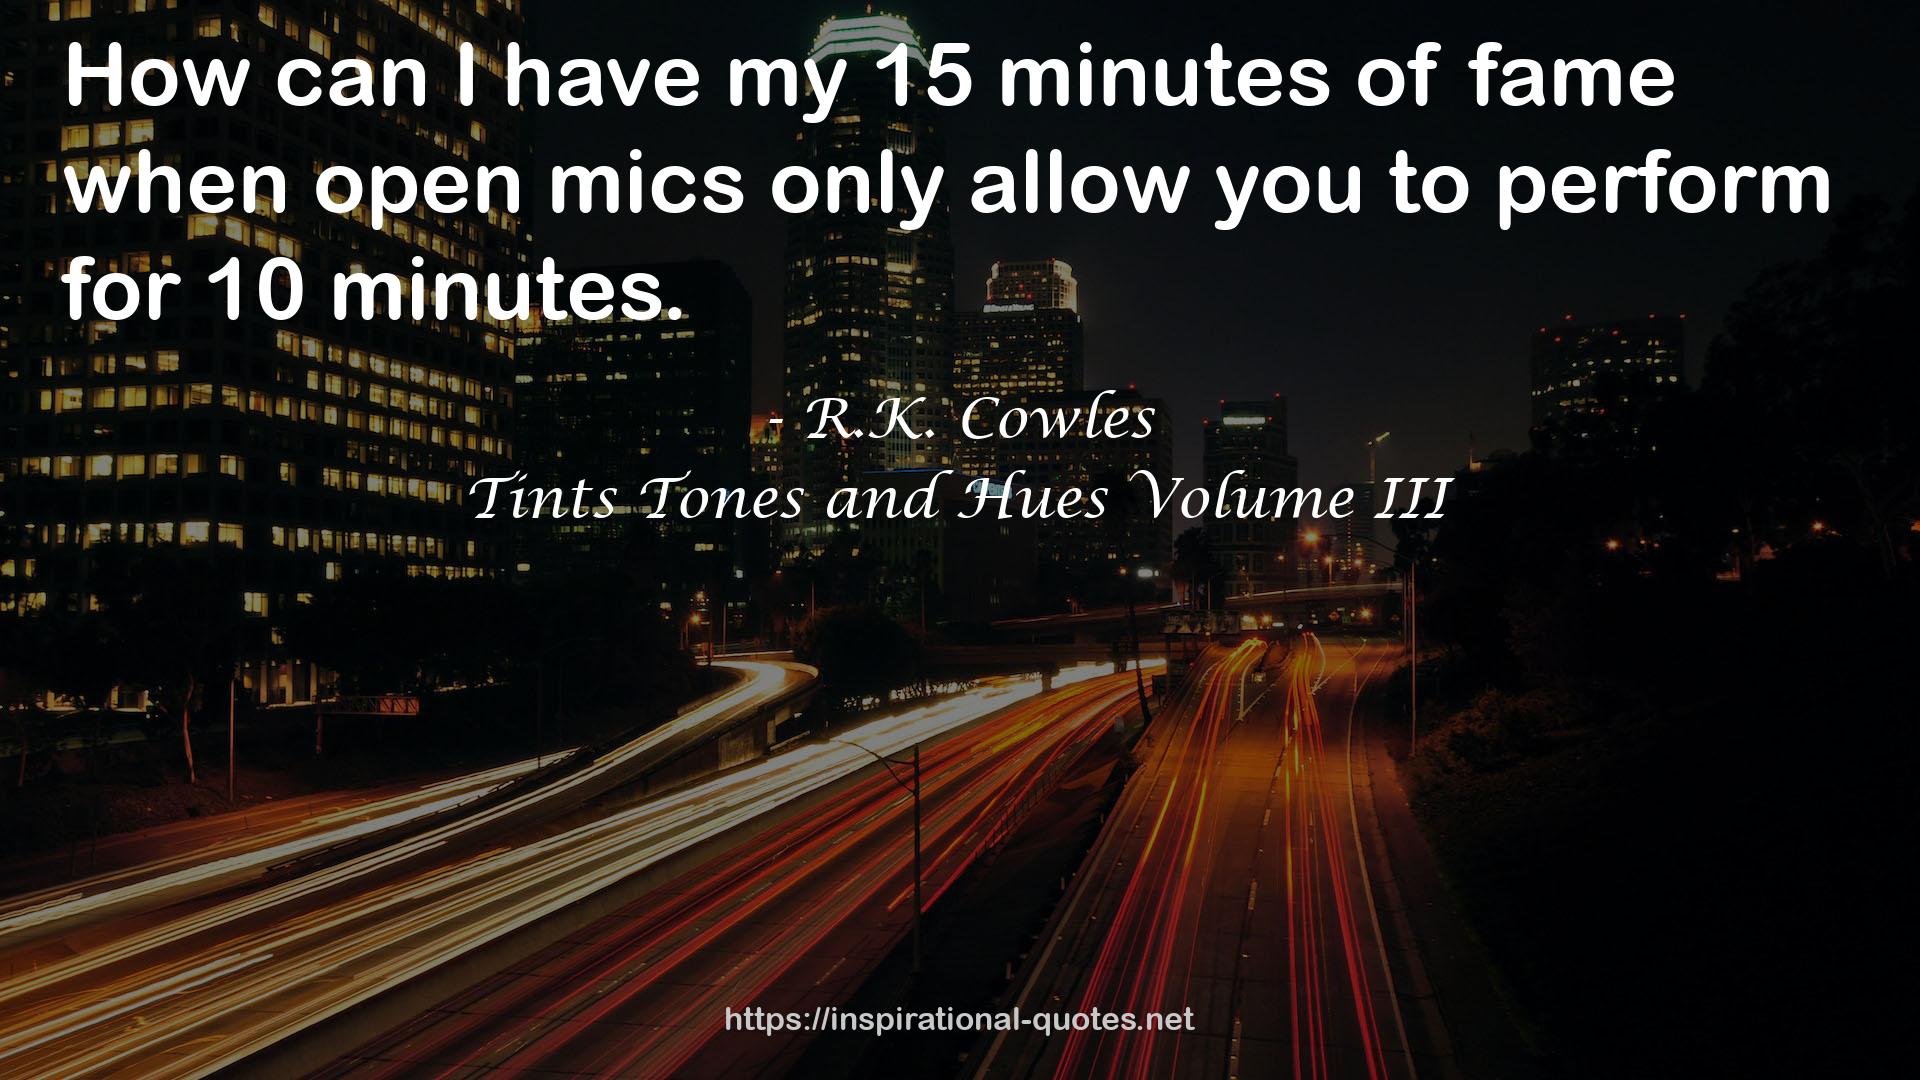 Tints Tones and Hues Volume III QUOTES